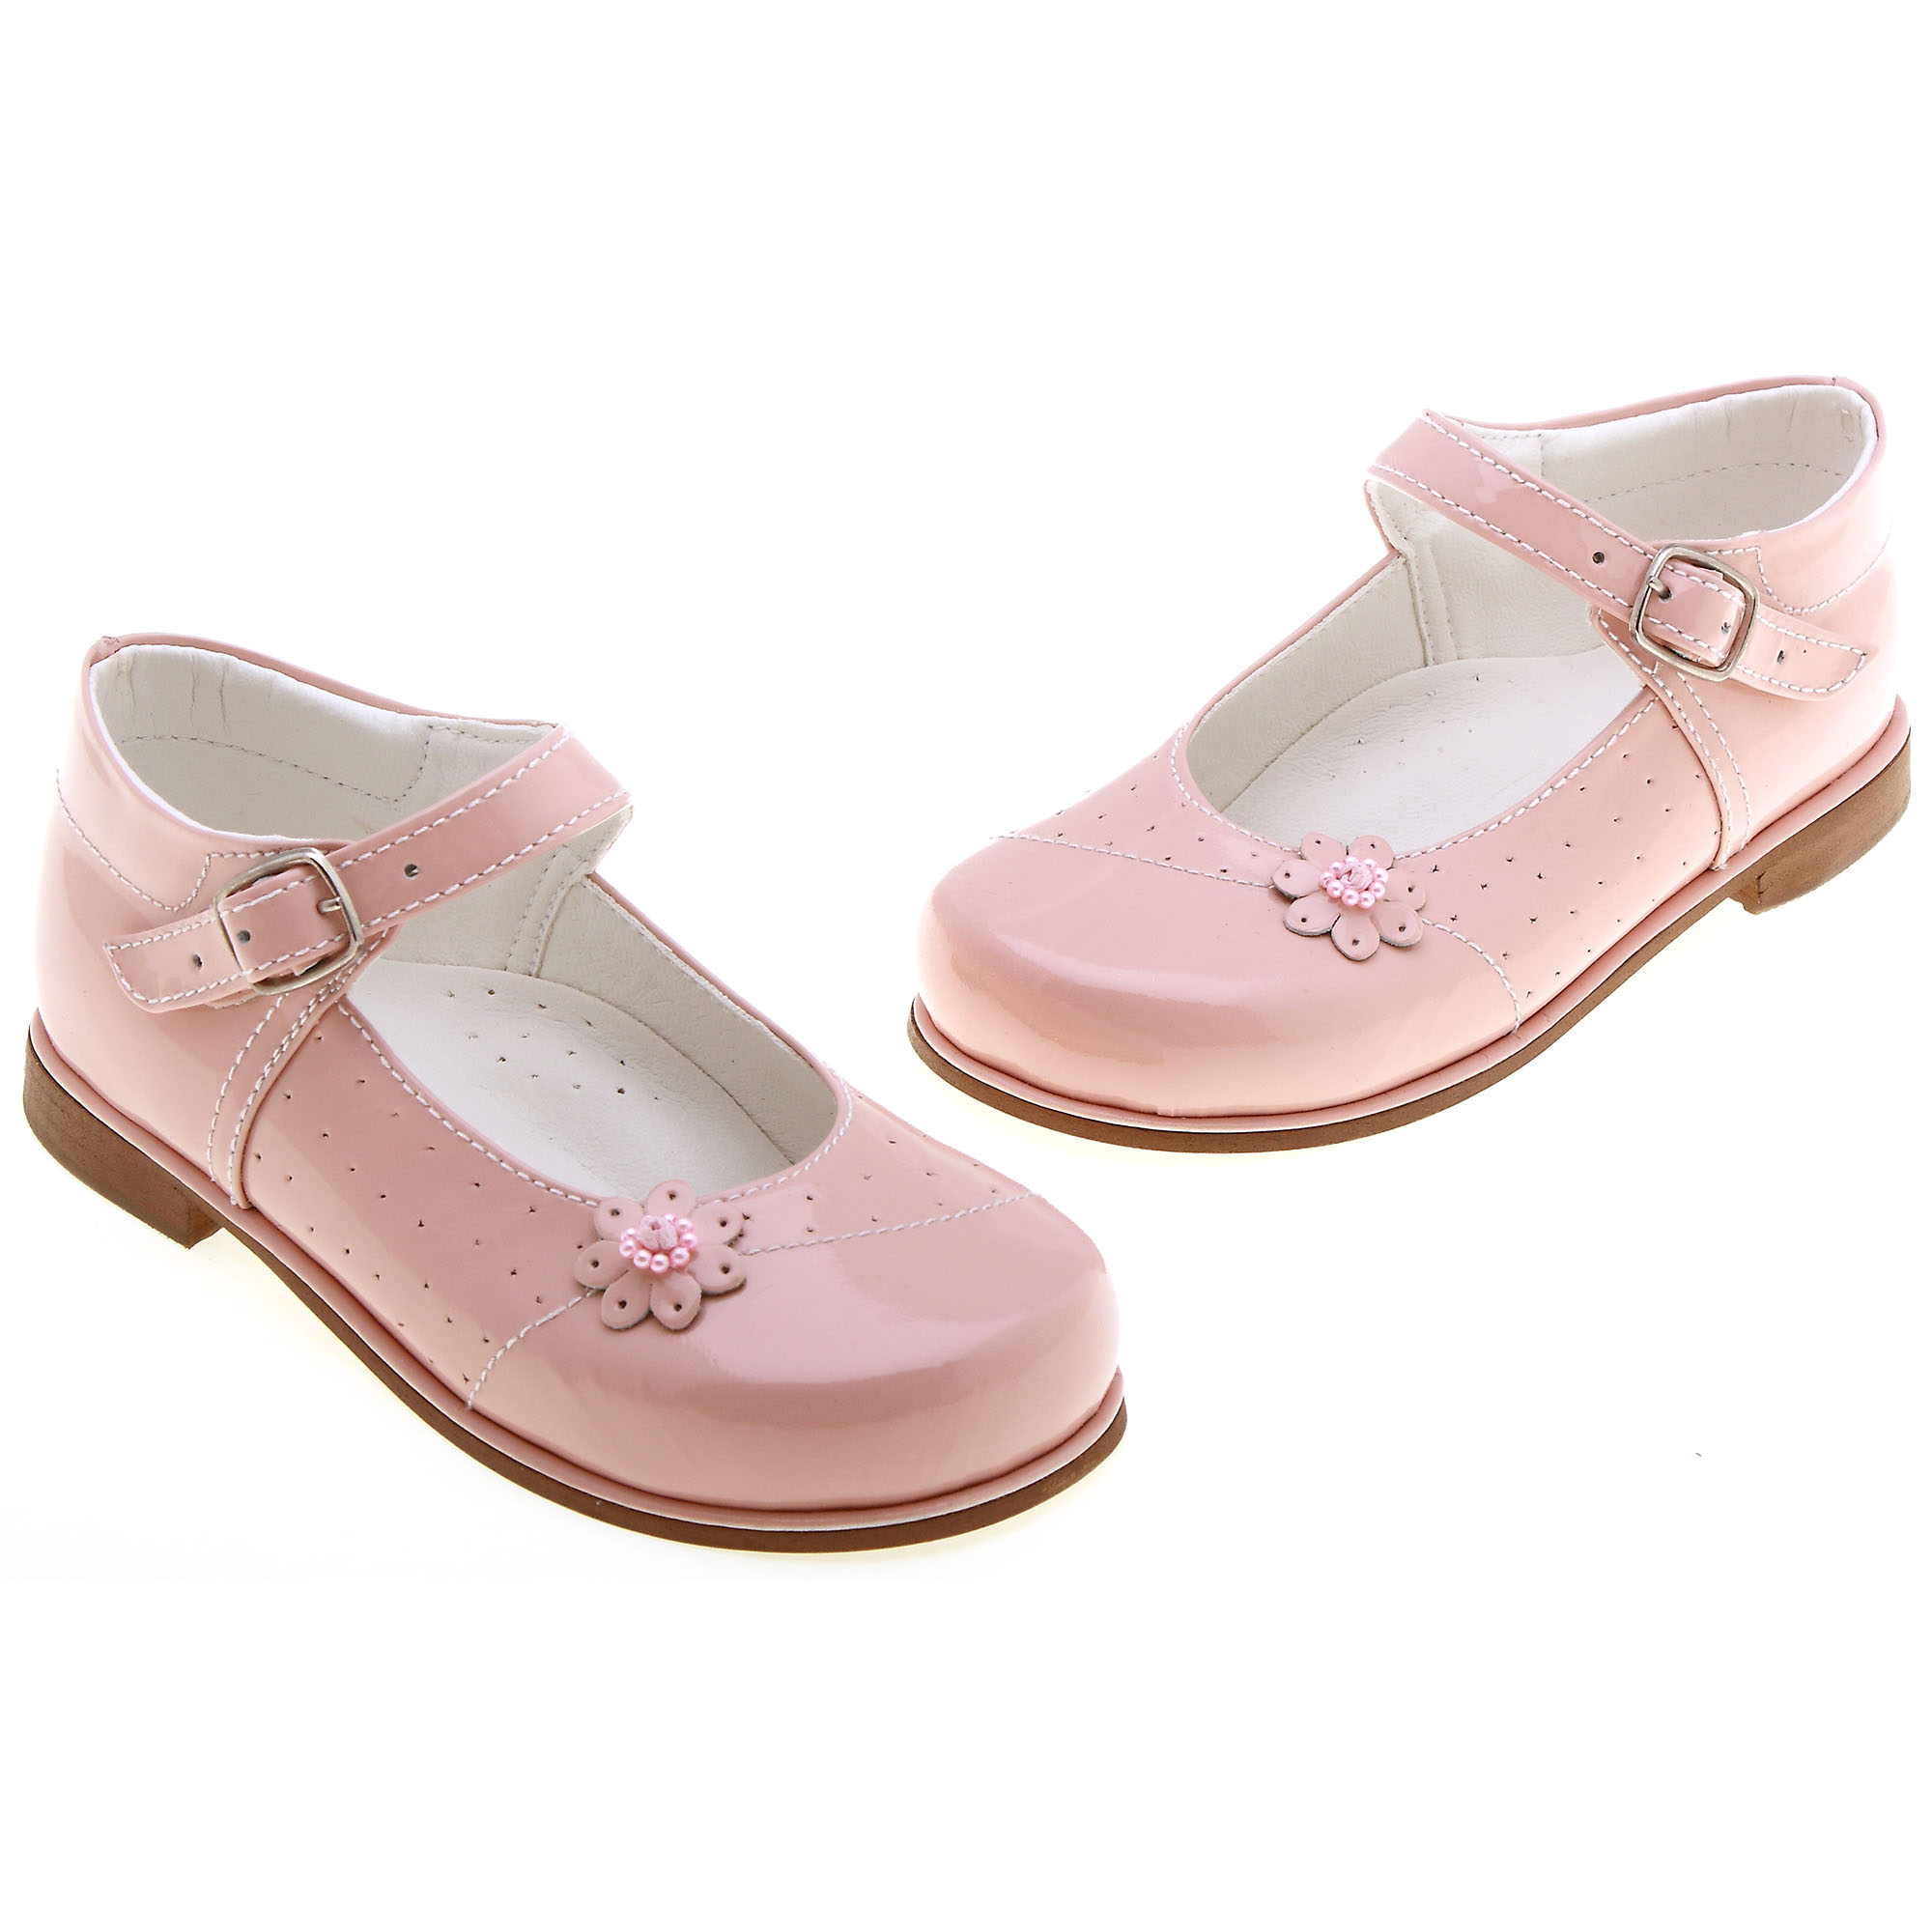 Girls classic Mary Janes Pink Patent Shoes Leather Flowers